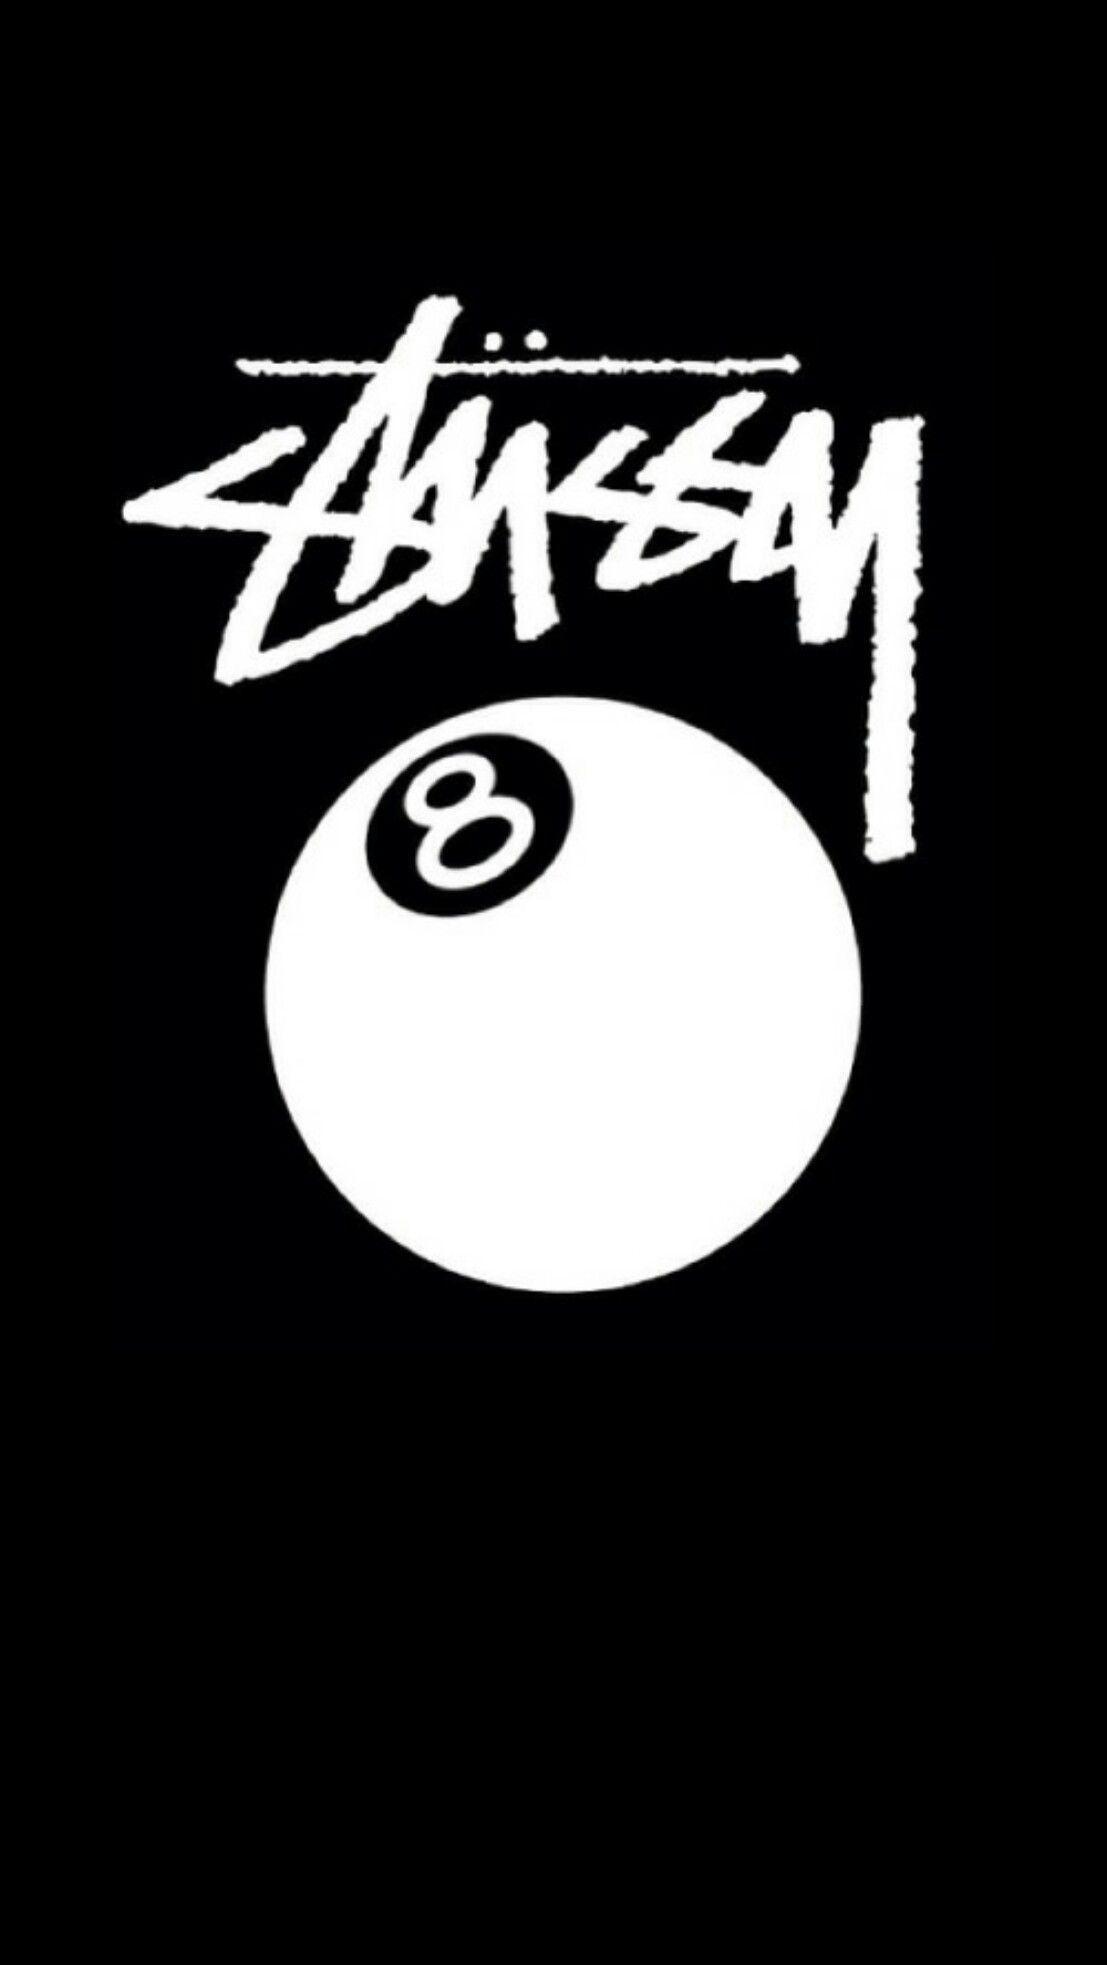 stussy #black #wallpaper #android #iphone. #fashion